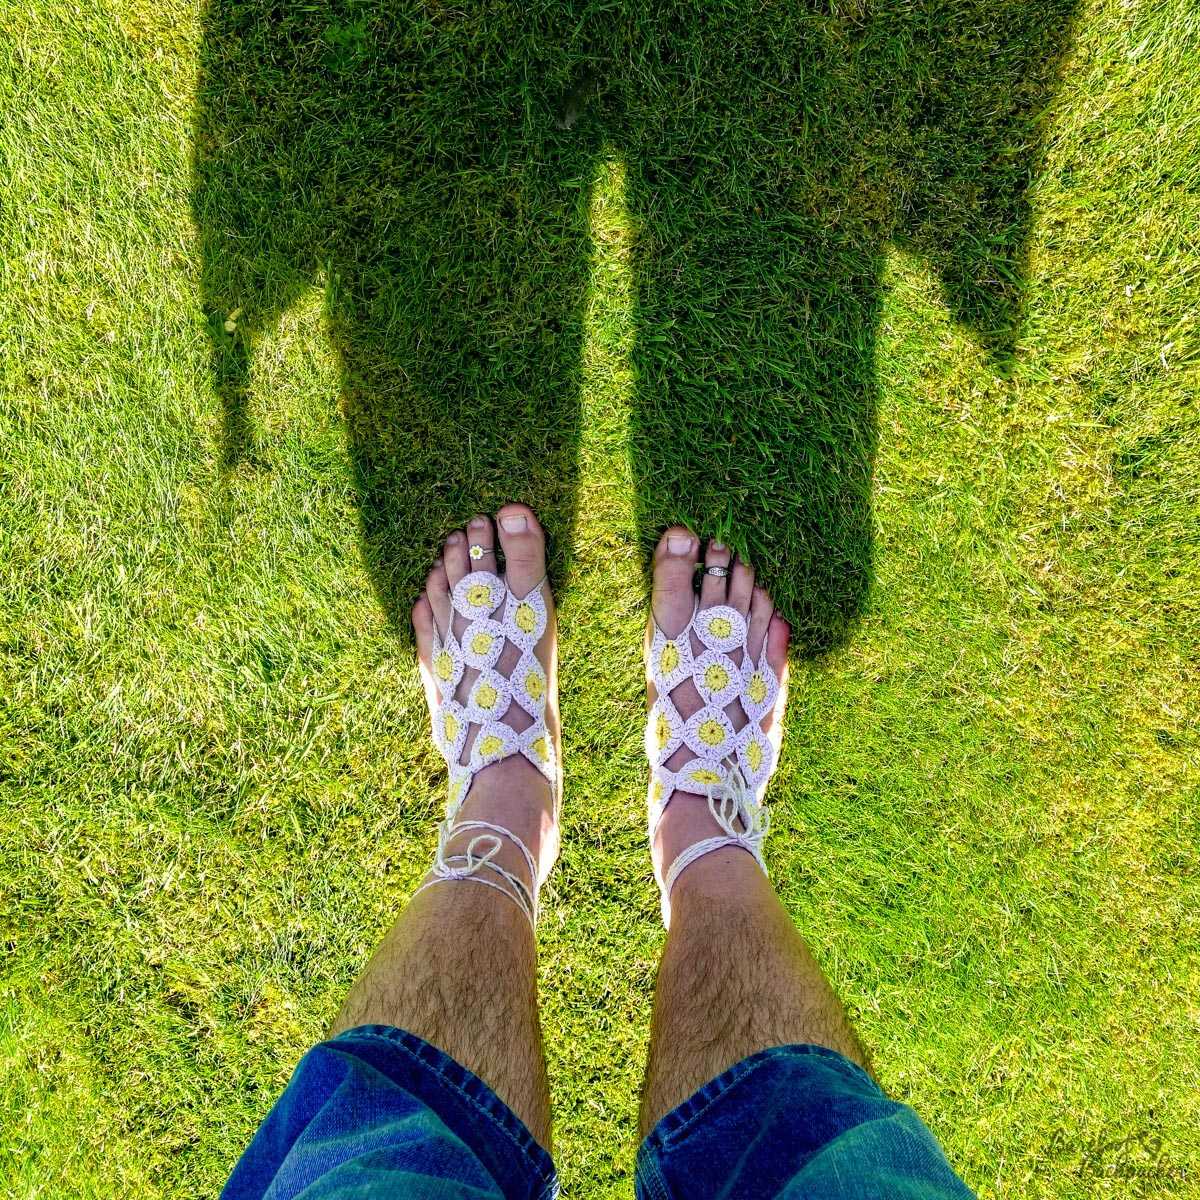 Daisy-themed Barefoot Sandals, on the grass